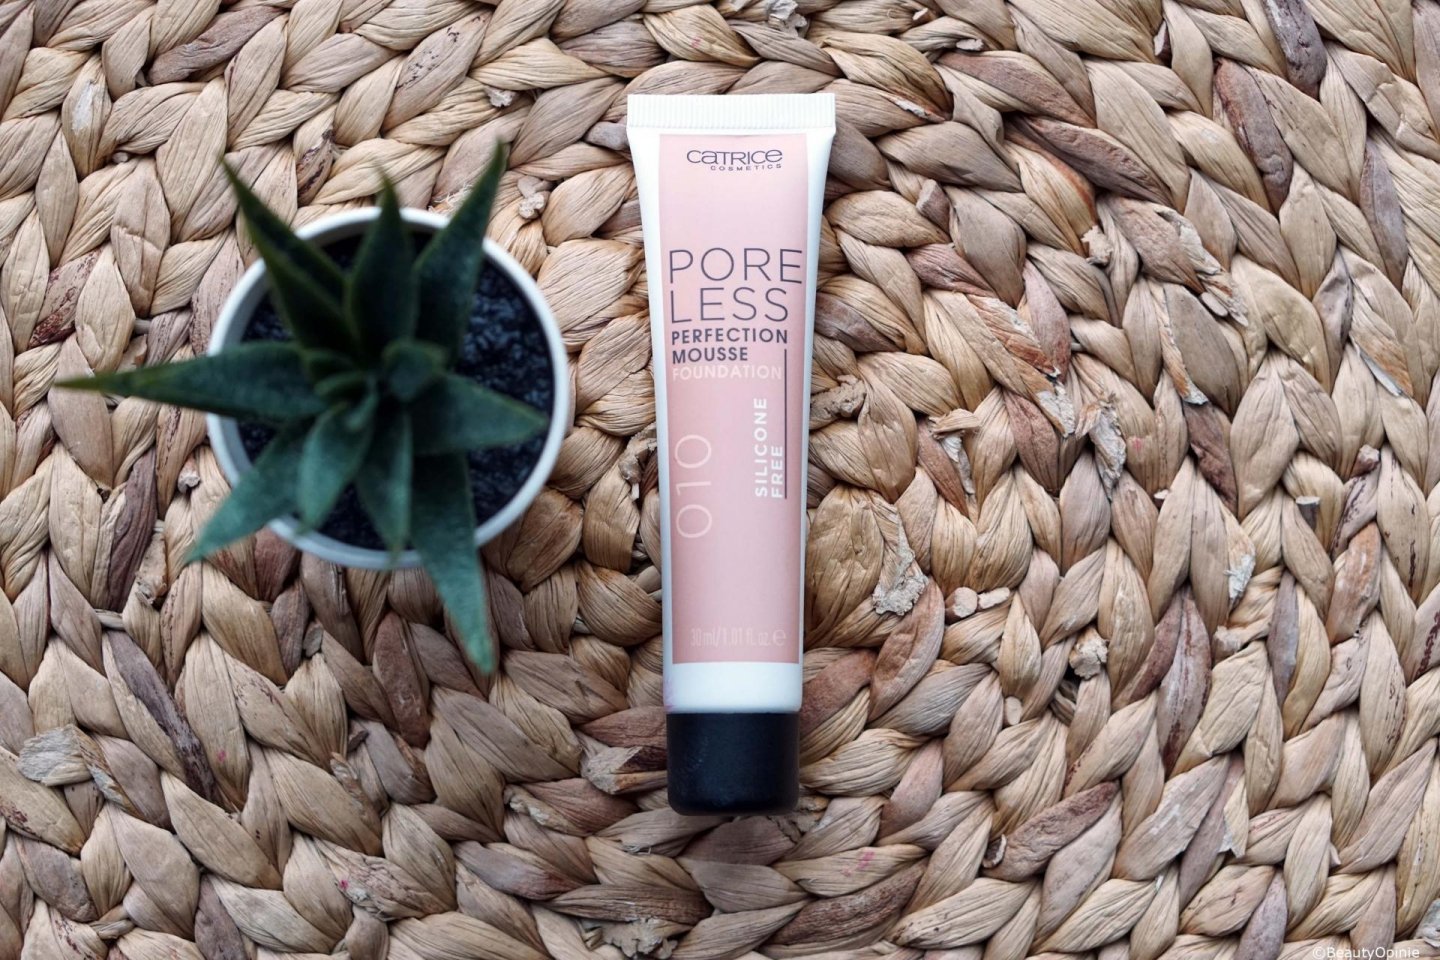 Review Catrice Poreless perfection foundation mousse,